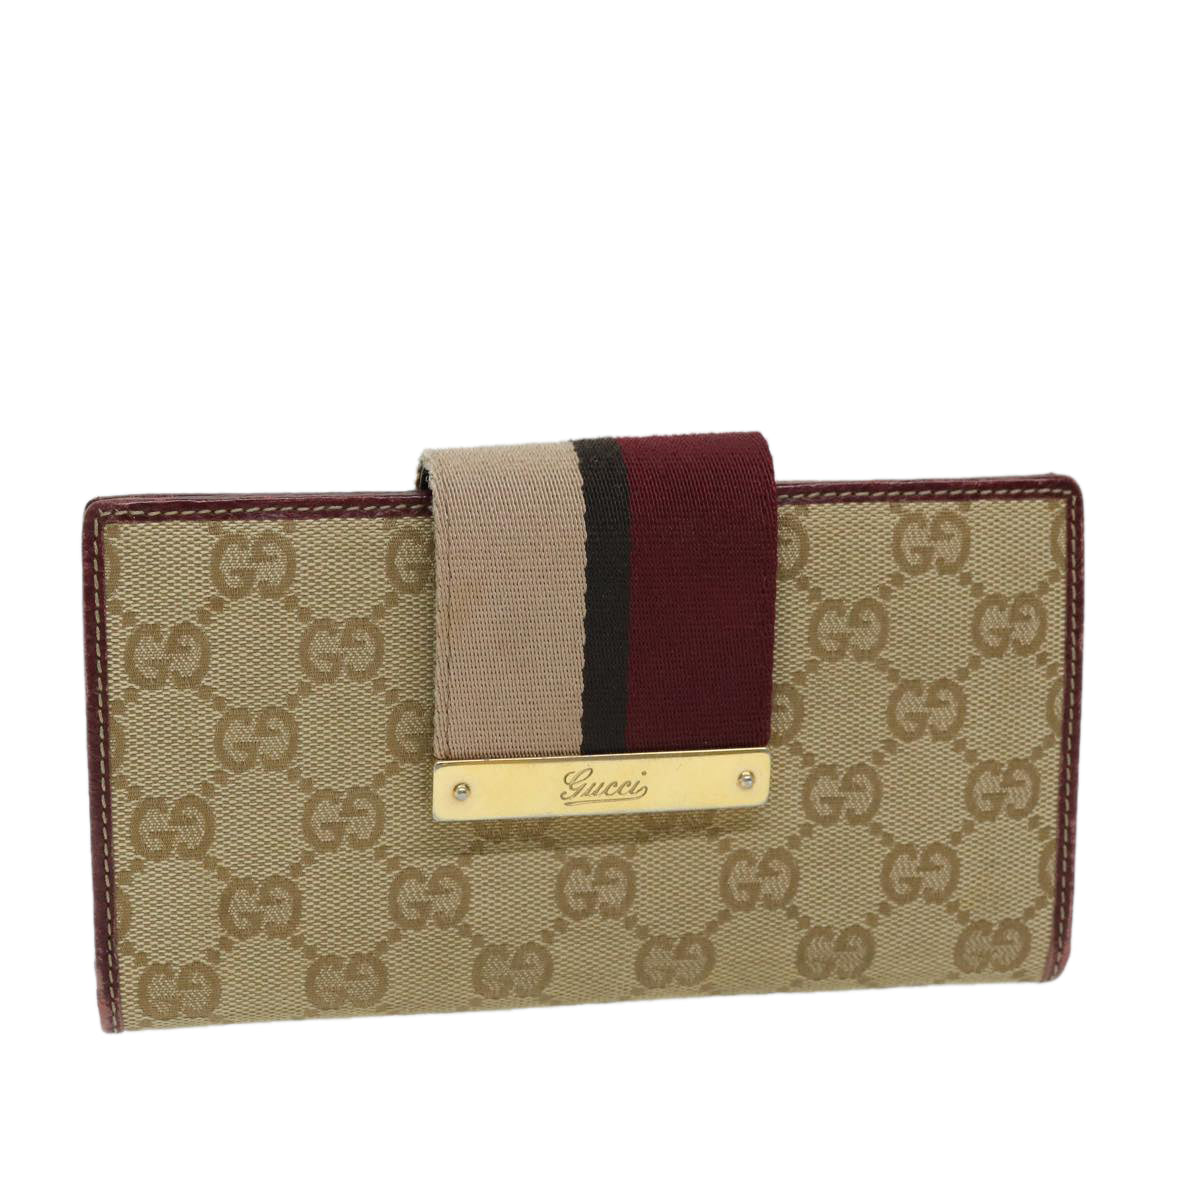 GUCCI GG Canvas Wallet Beige Green Red 181668 Auth fm3304